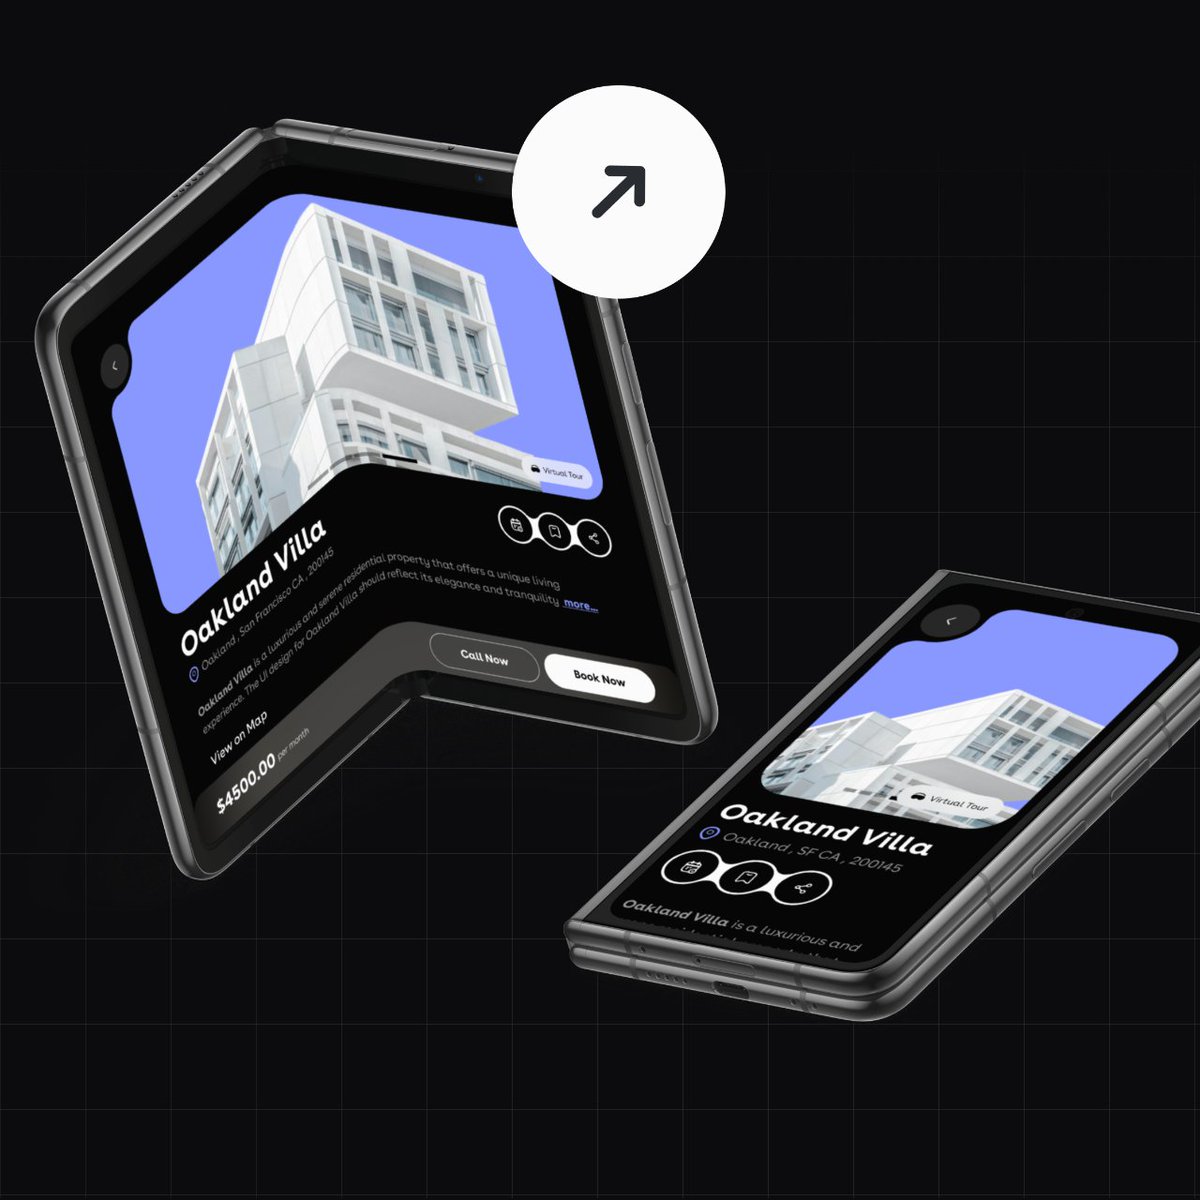 Foldable Real Estate: Explore Your Dream Home! Part 1 - Discover properties in style on foldable screens.
dribbble.com/domingo
#FoldableLiving #RealEstateTech #InnovativeDesign #FoldableScreens #DreamHome #PropertySearch #UIInspiration #FutureHomes #FoldableUI